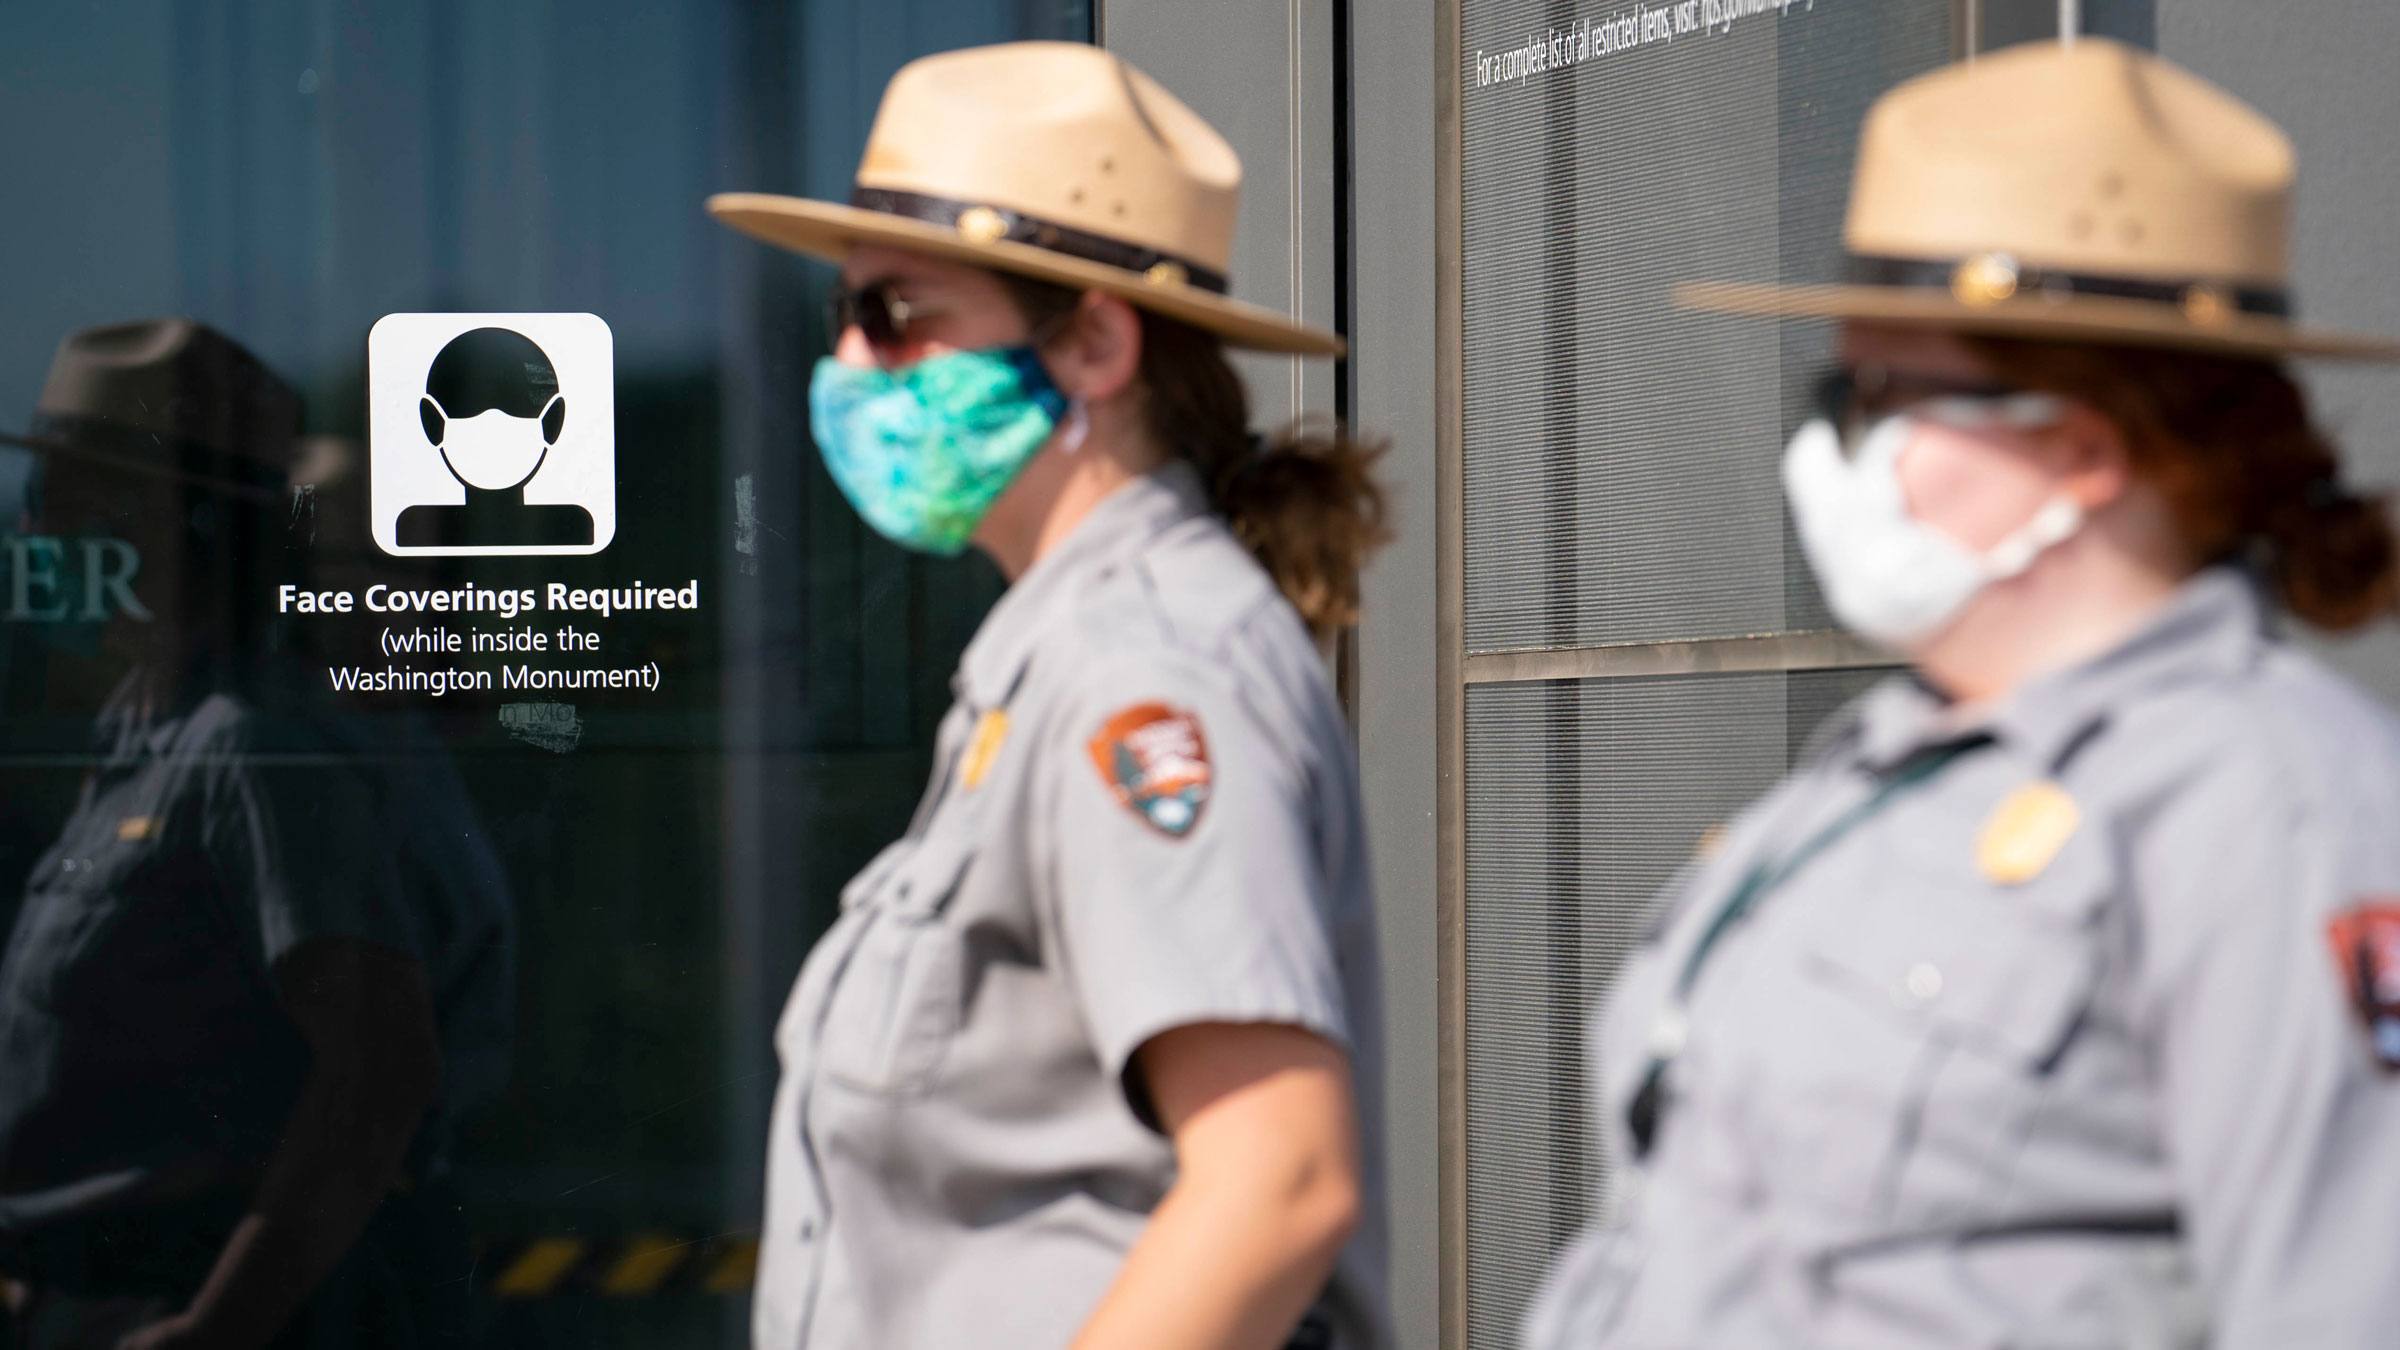 National Park Service rangers wear face masks as they interact with visitors at the reopening of the Washington Monument in October 2020.